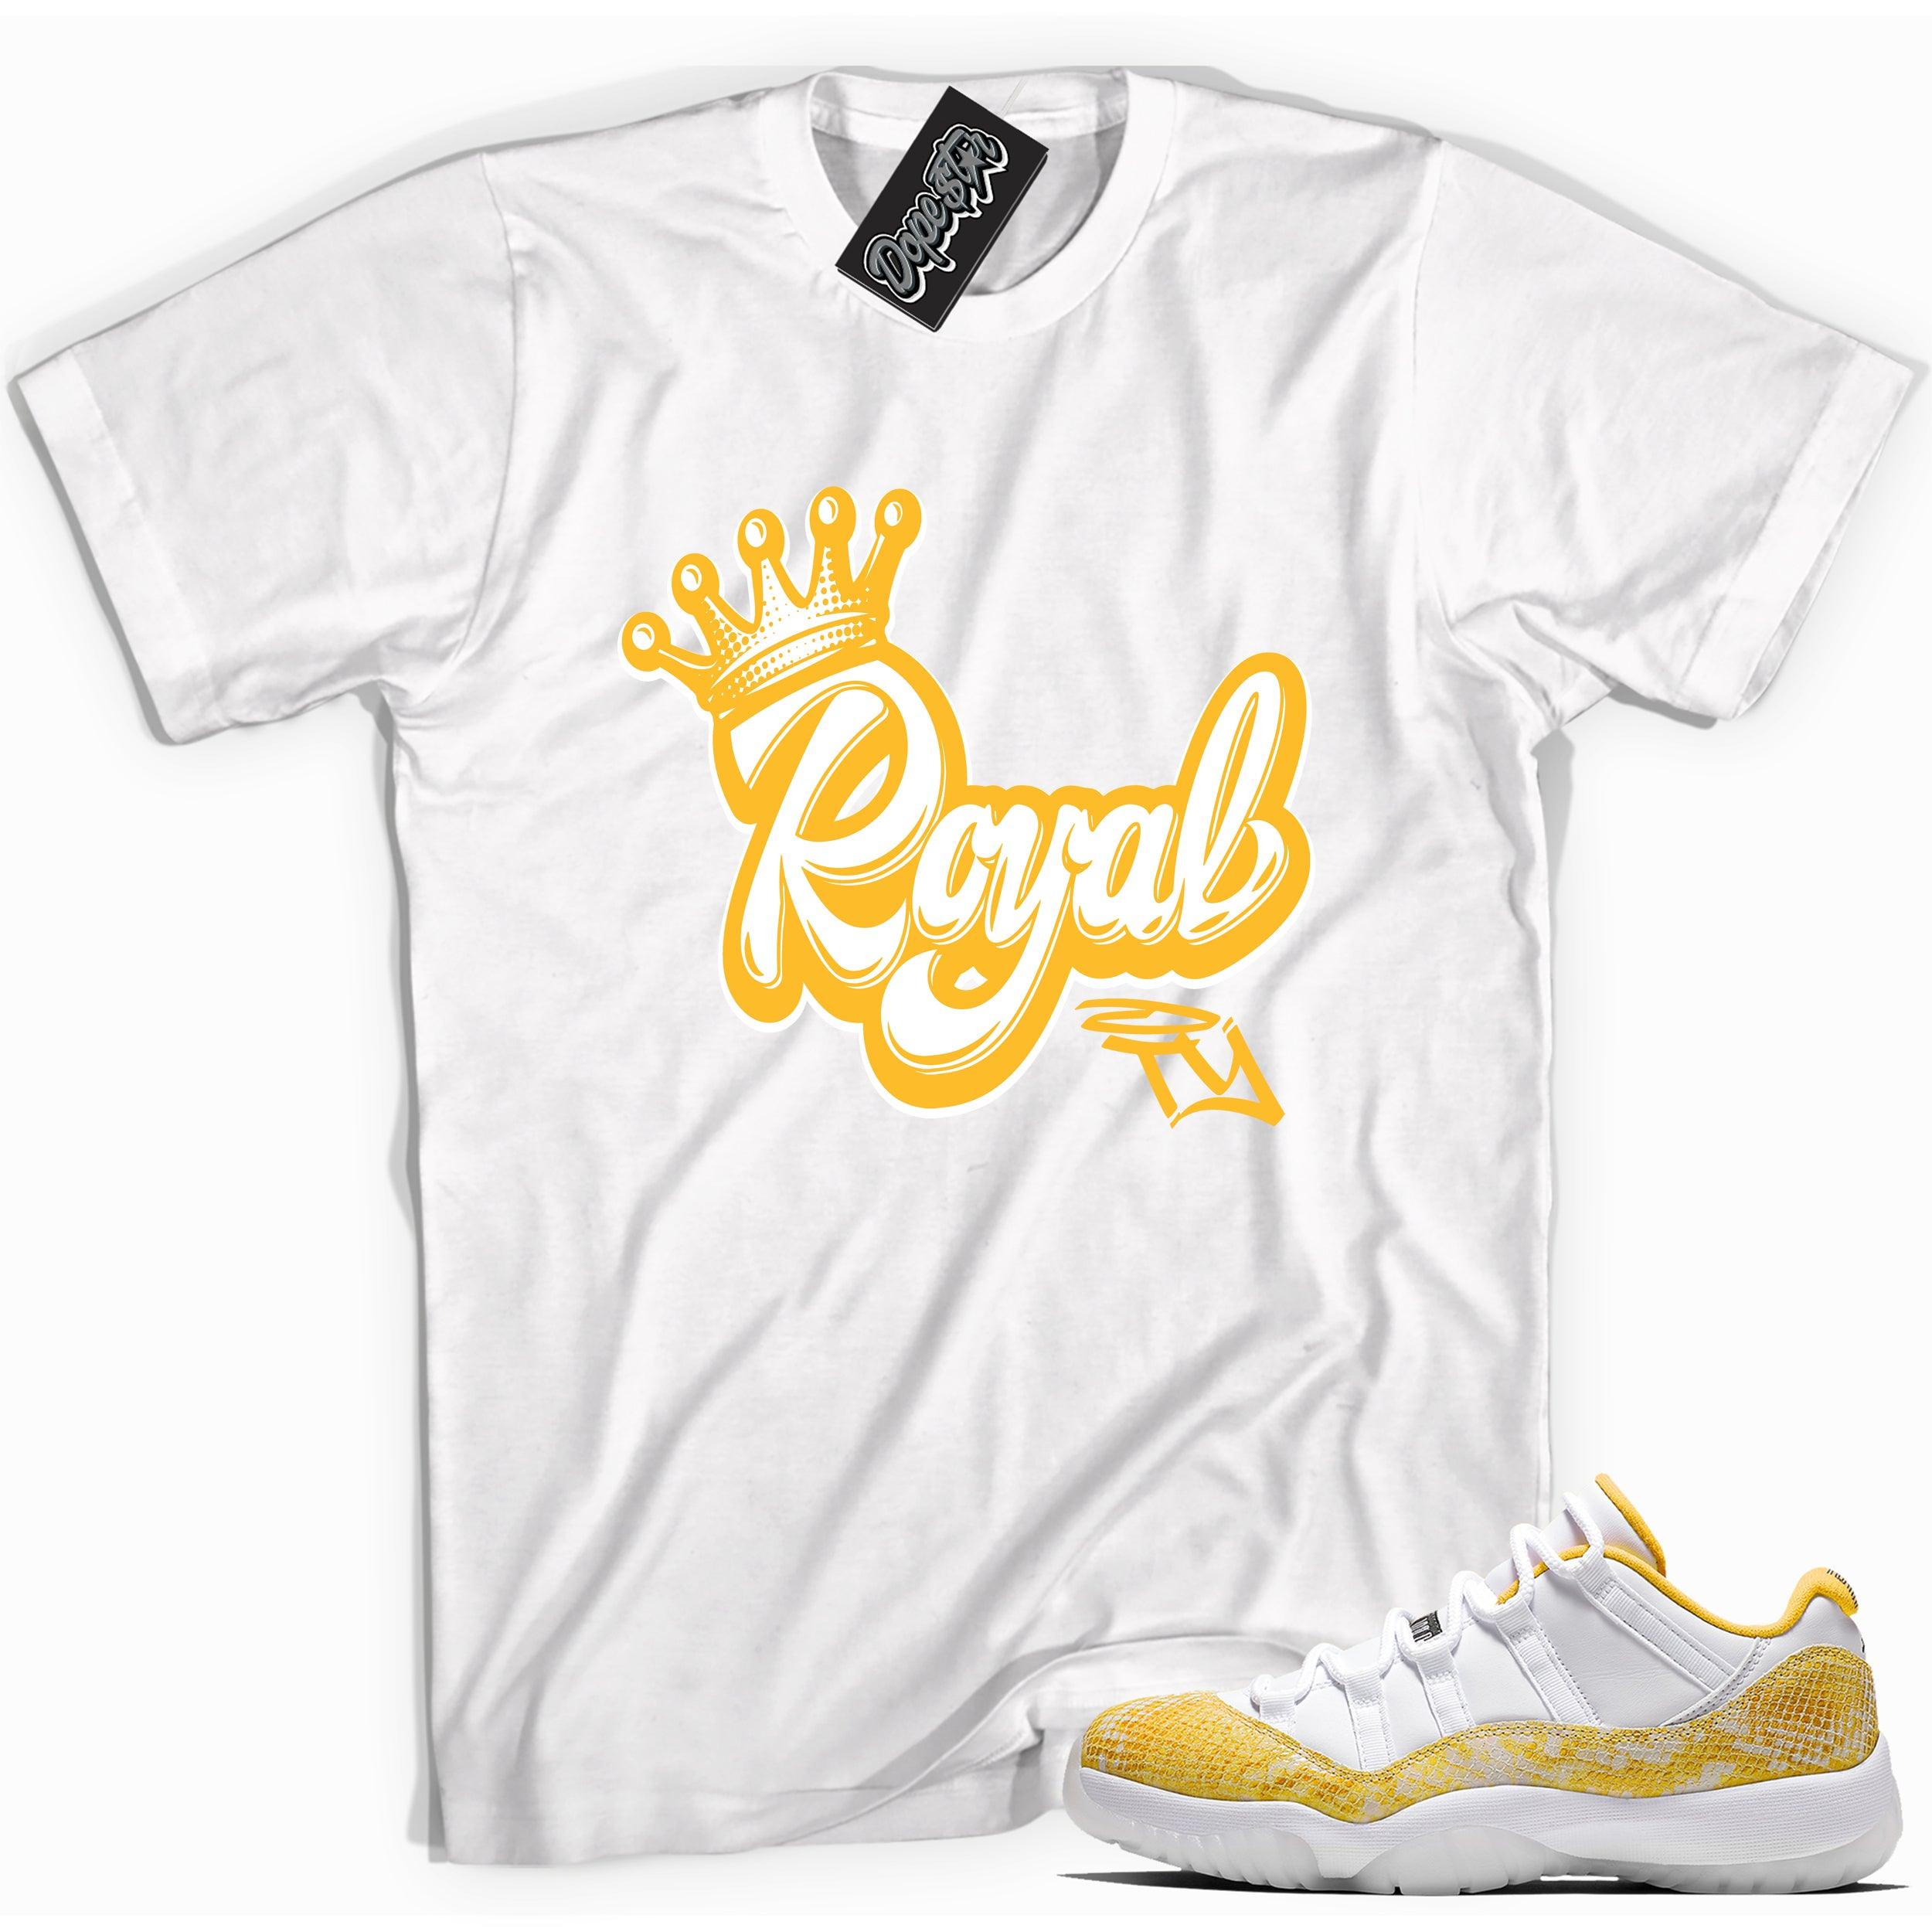 Cool white graphic tee with 'royalty' print, that perfectly matches Air Jordan 11 Retro Low Yellow Snakeskin sneakers